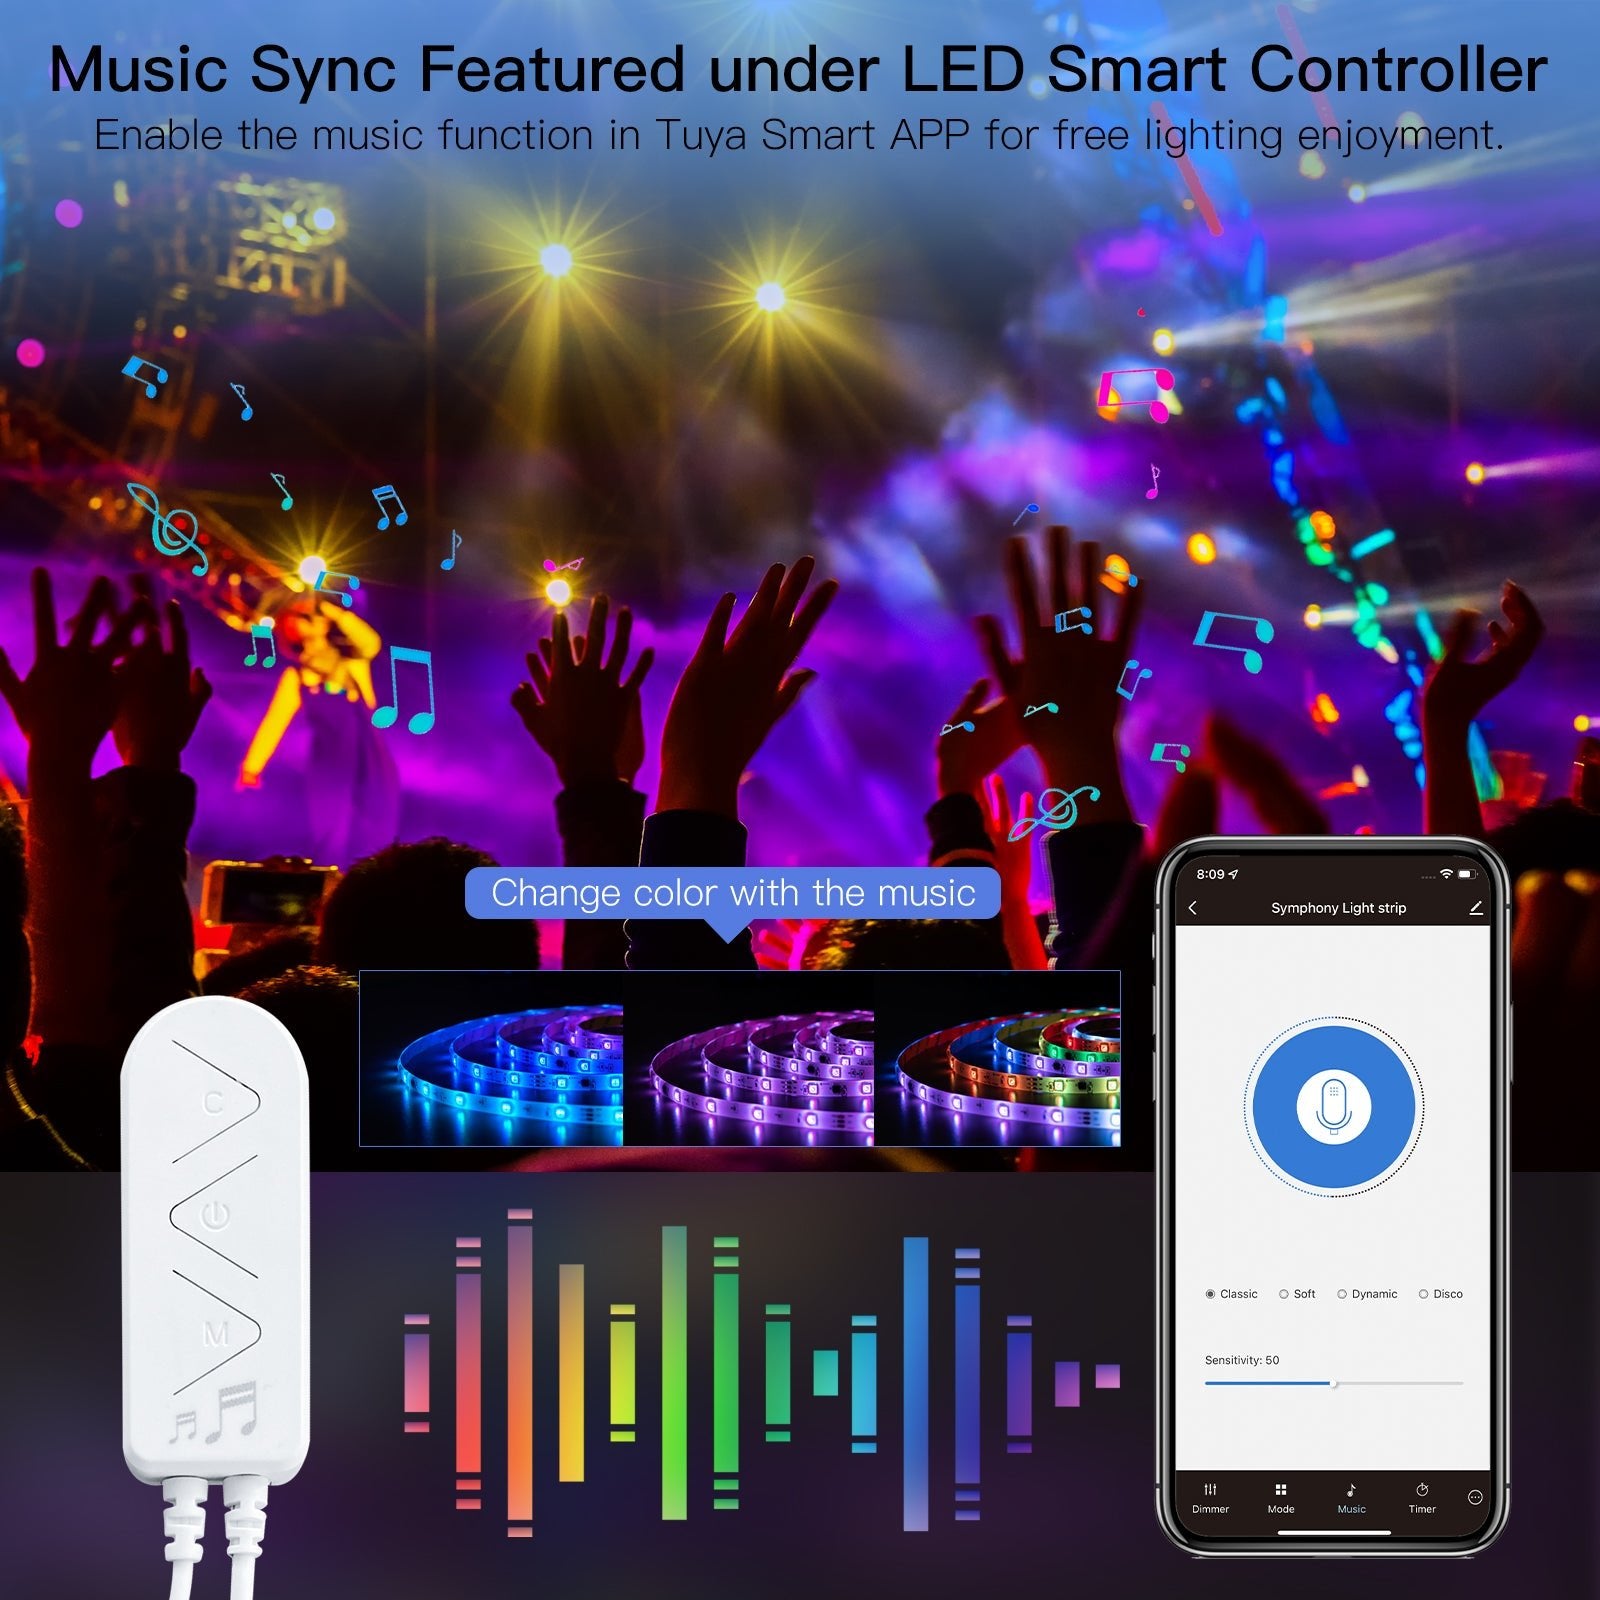 Enable the music function in Tuya Smart APP for free lighting enjoyment. - MOES